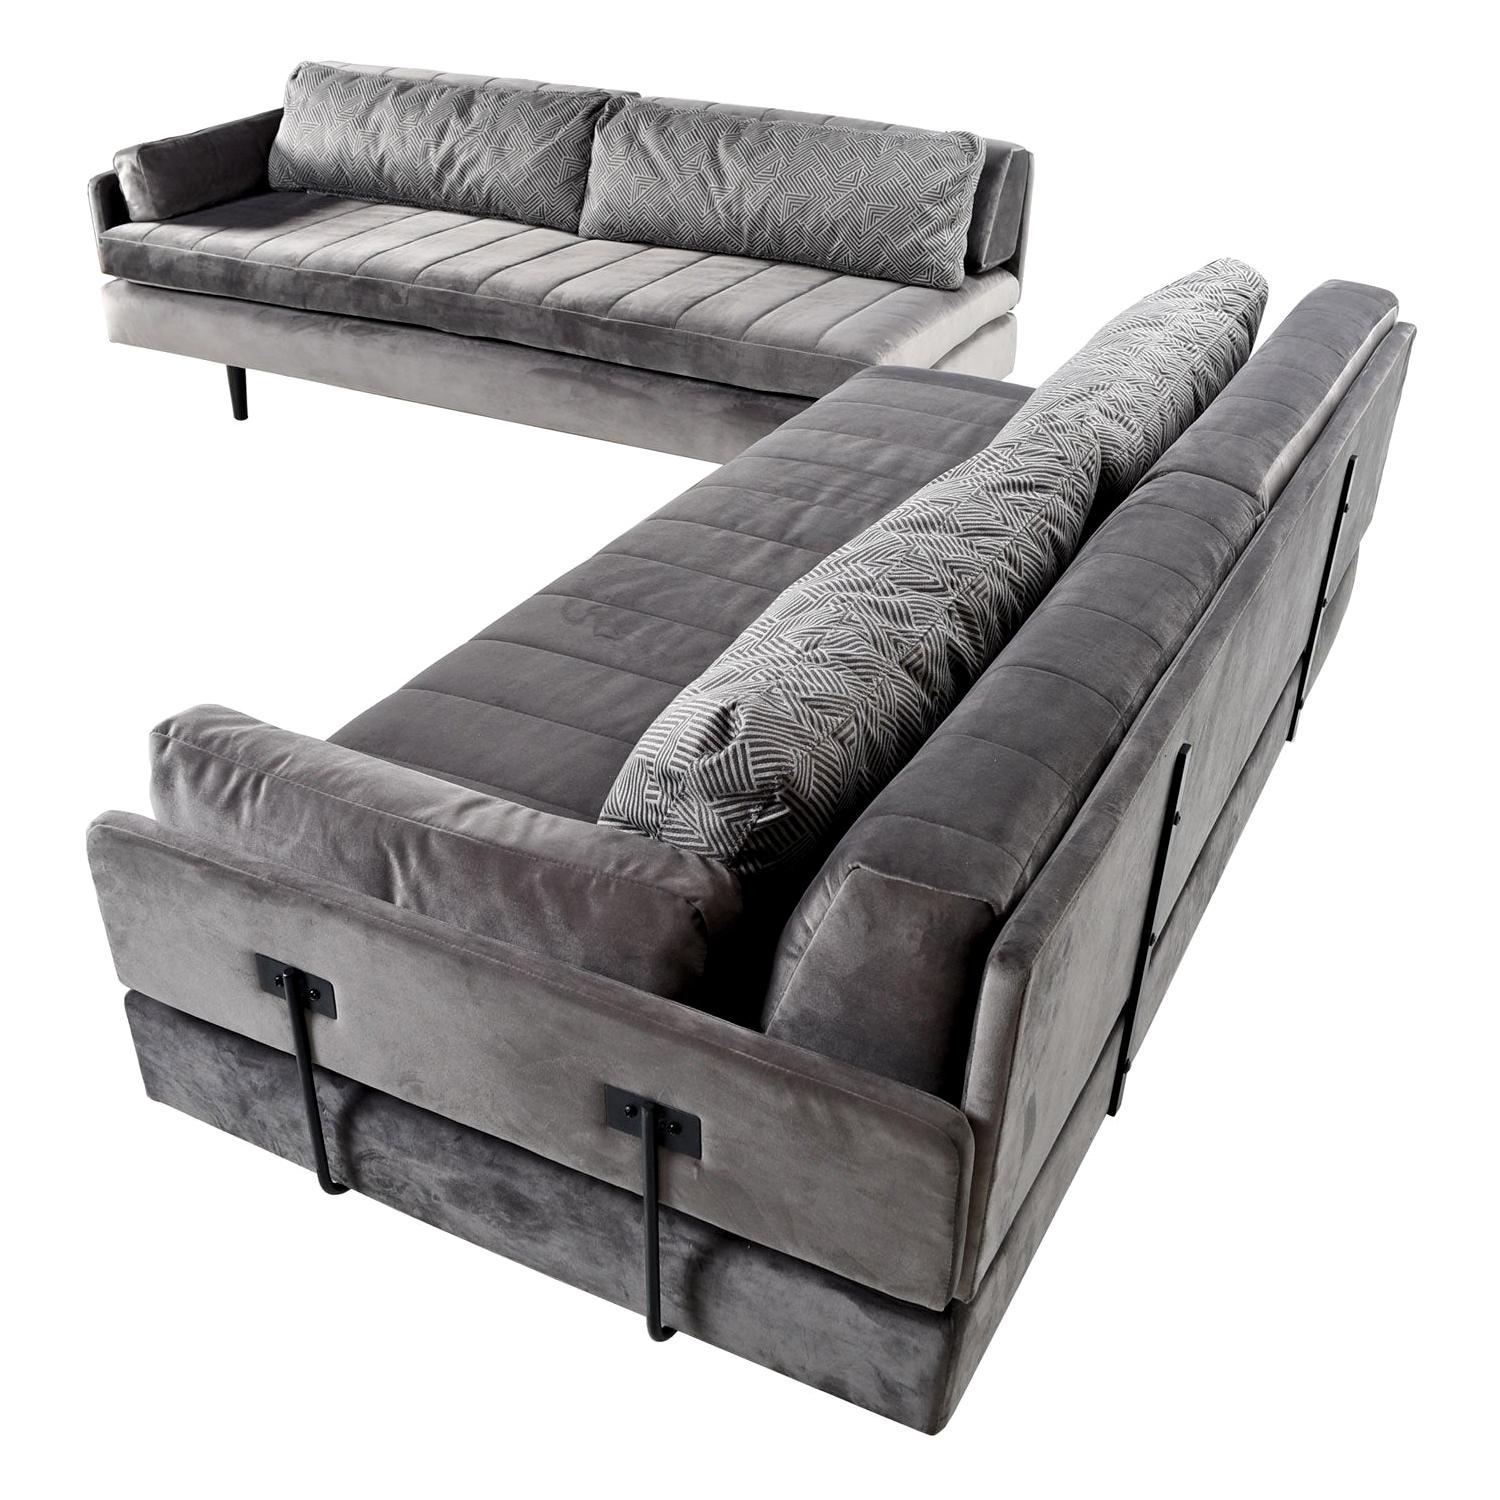 Bespoke Mid-Century Modern modular daybed sofa set. Custom design re-purposing vintage Mid-Century Modern platform daybeds, the remainder of sofa is completely custom built and re-fabricated, new mattress, back bolsters and cushions, newly recovered